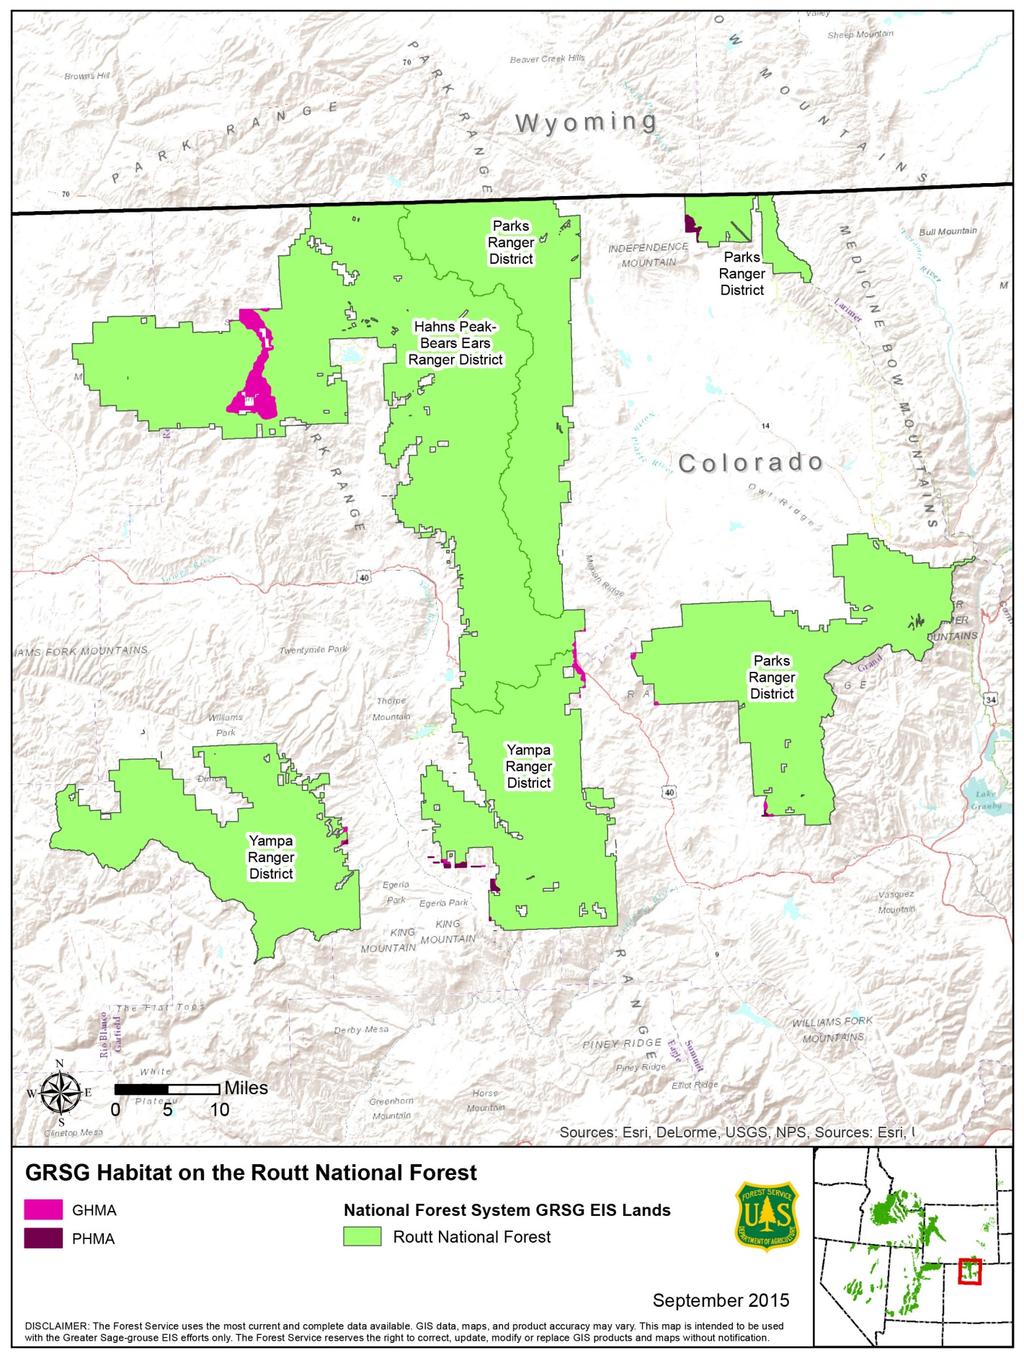 Map 1. GRSG Habitat on the Routt National Forest.